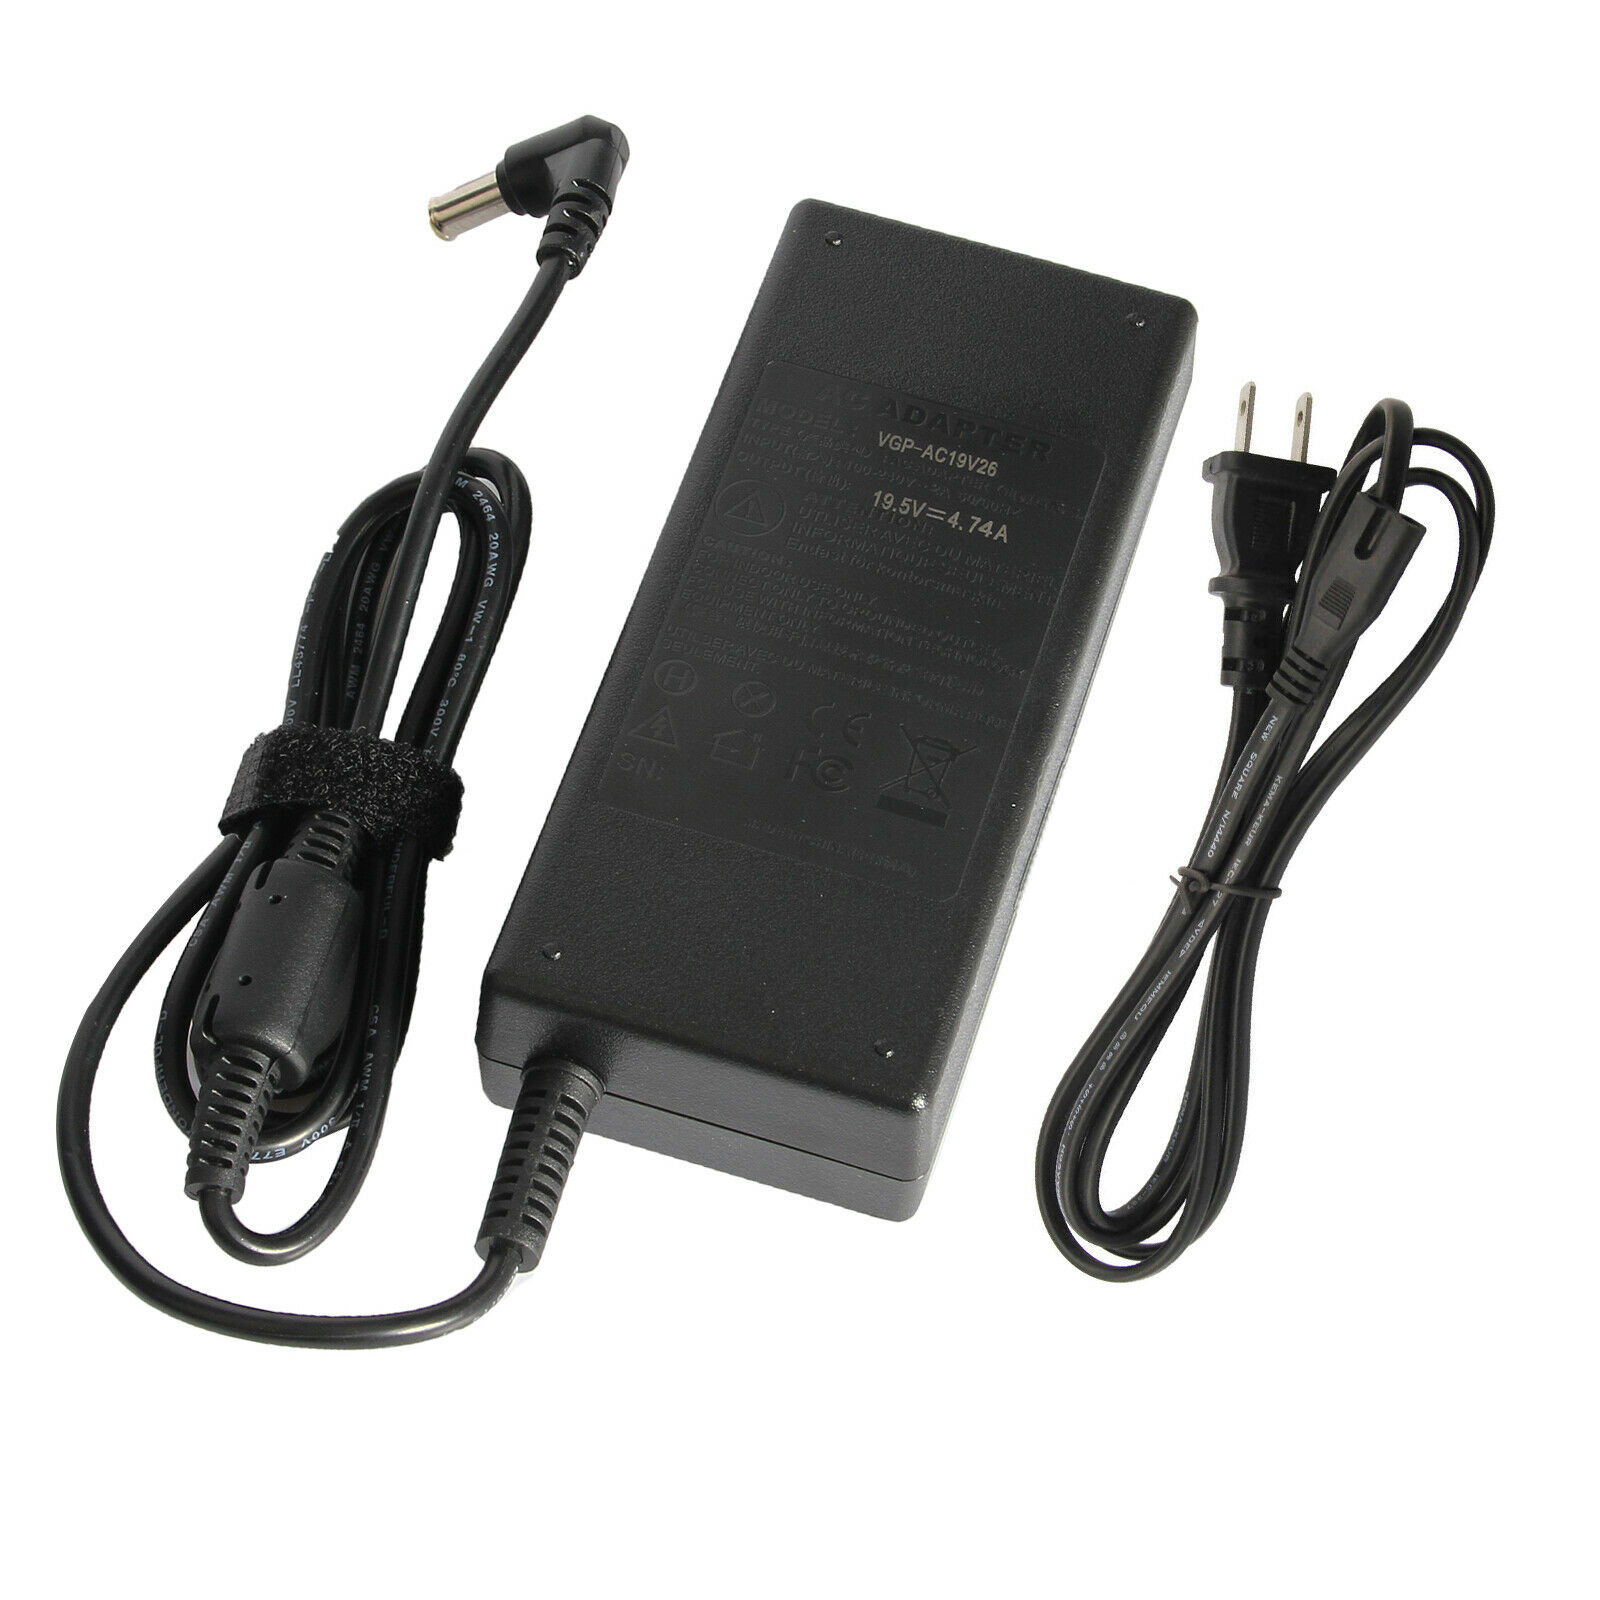 AC ADAPTER FOR LG ELECTRONICS FULL HD LCD LED MONITOR 19.5V POWER SUPPLY CHARGER